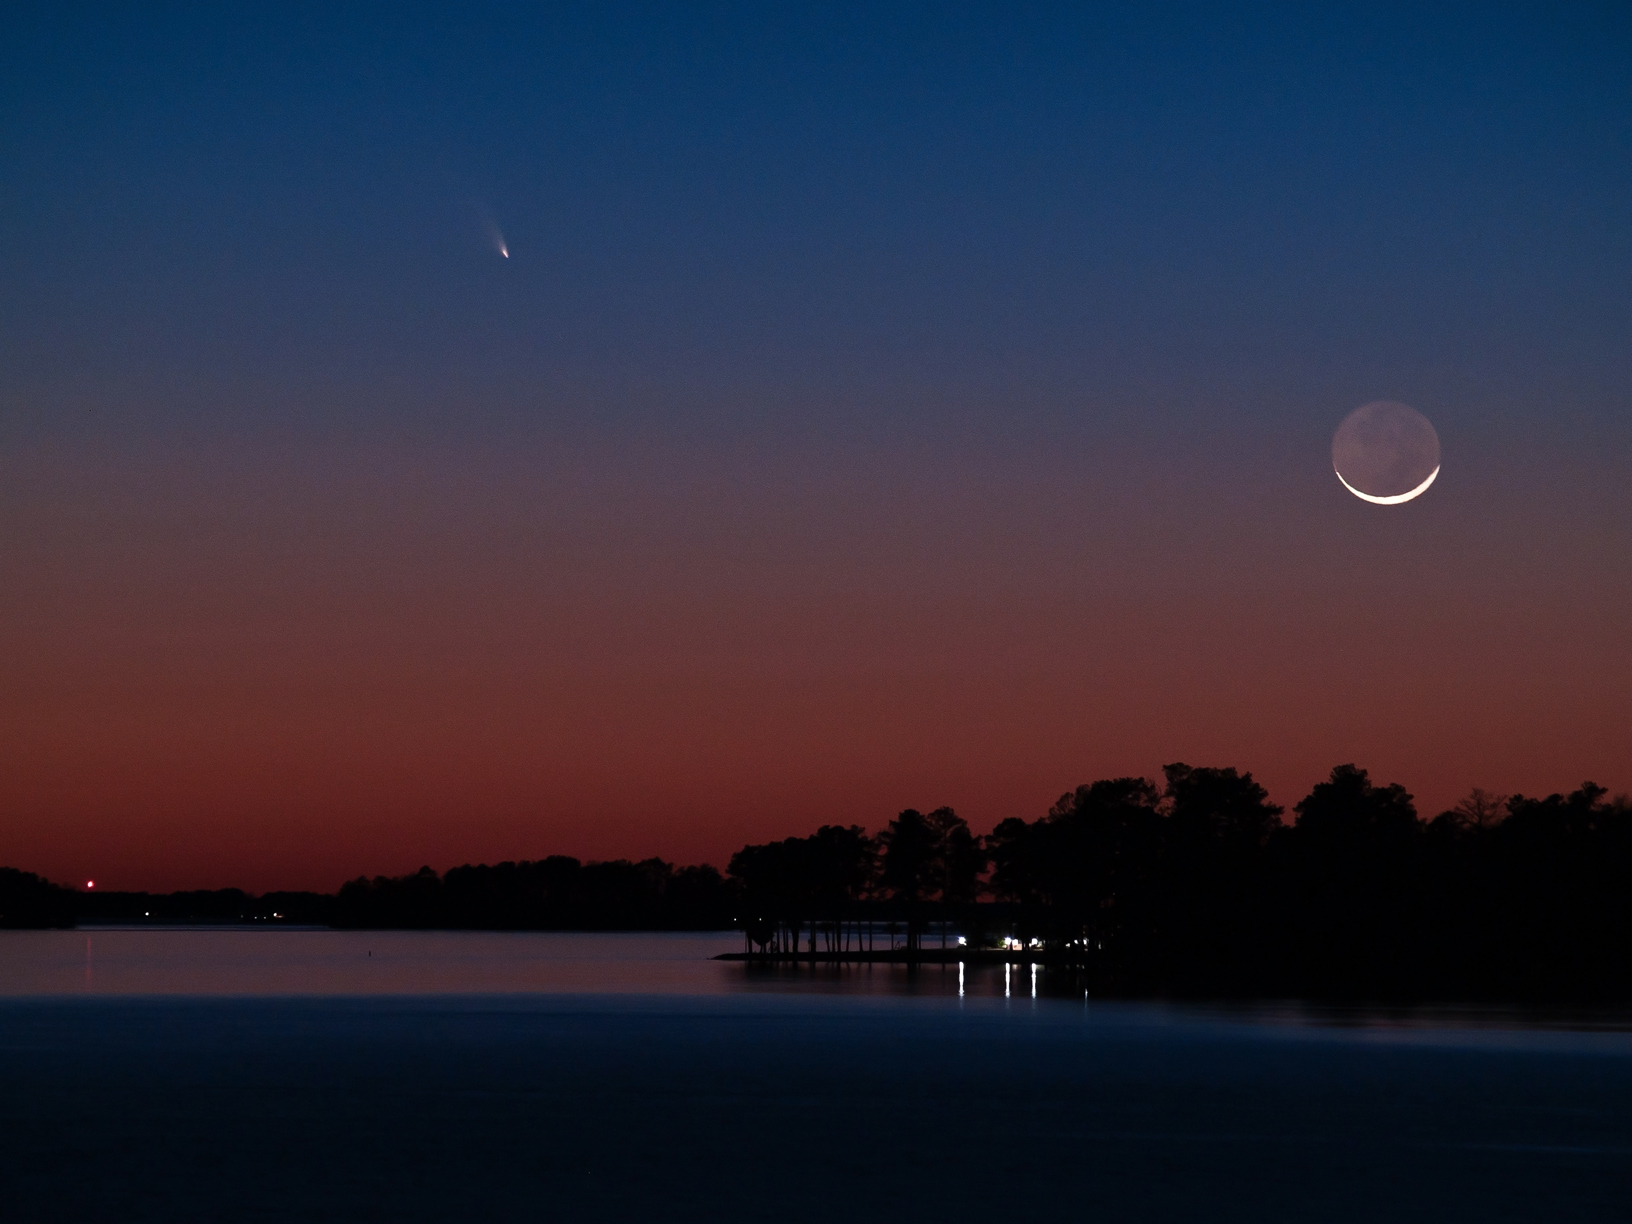 Charles Hite - Comet PanSTARRS and Crescent Moon